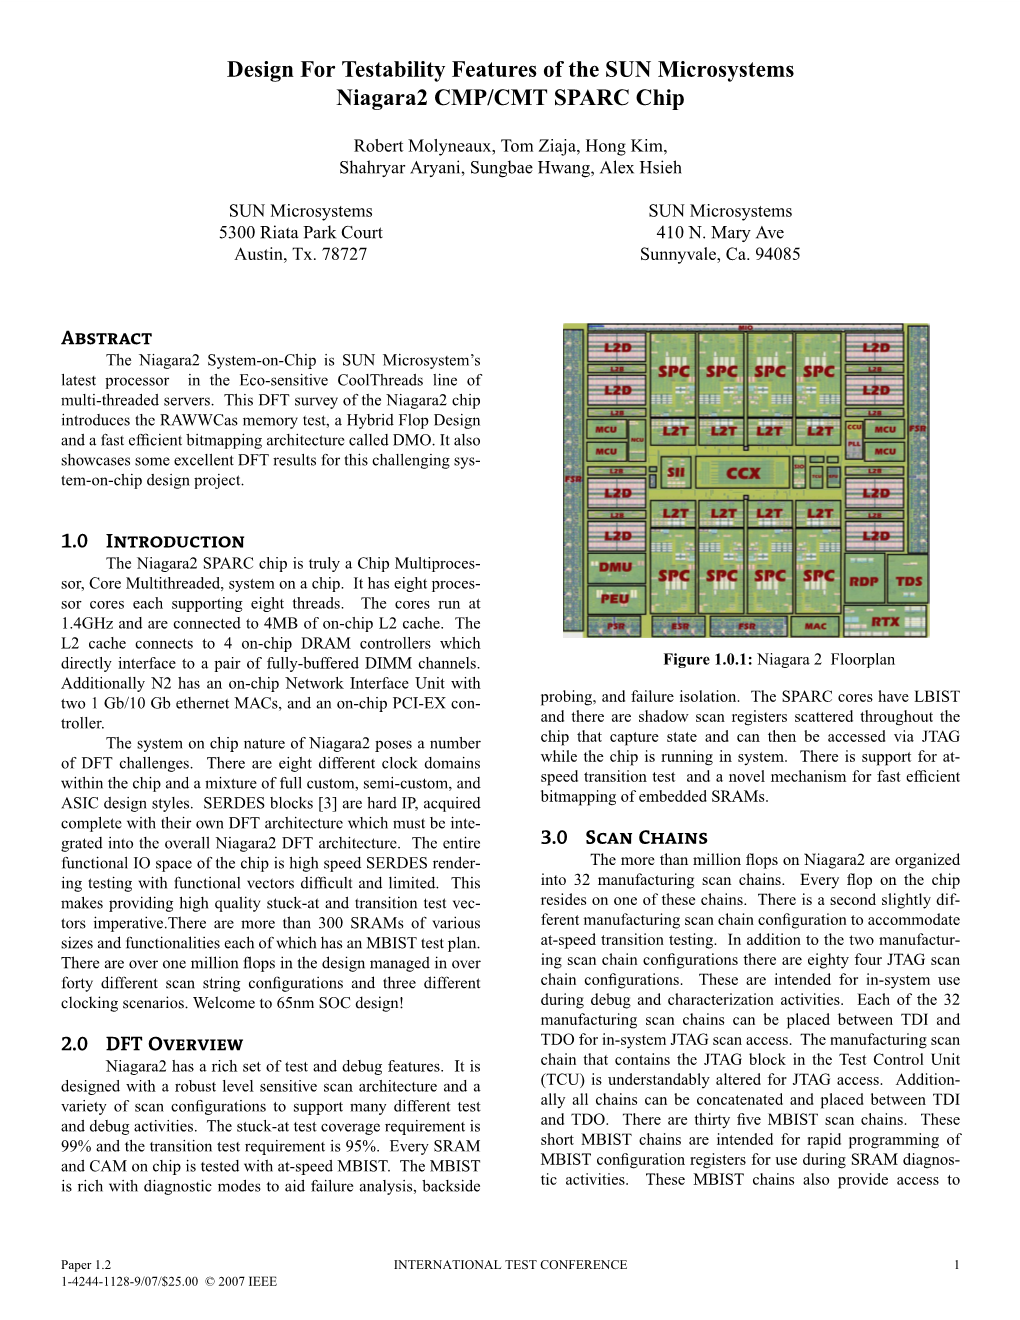 Design for Testability Features of the SUN Microsystems Niagara2 CMP/CMT SPARC Chip